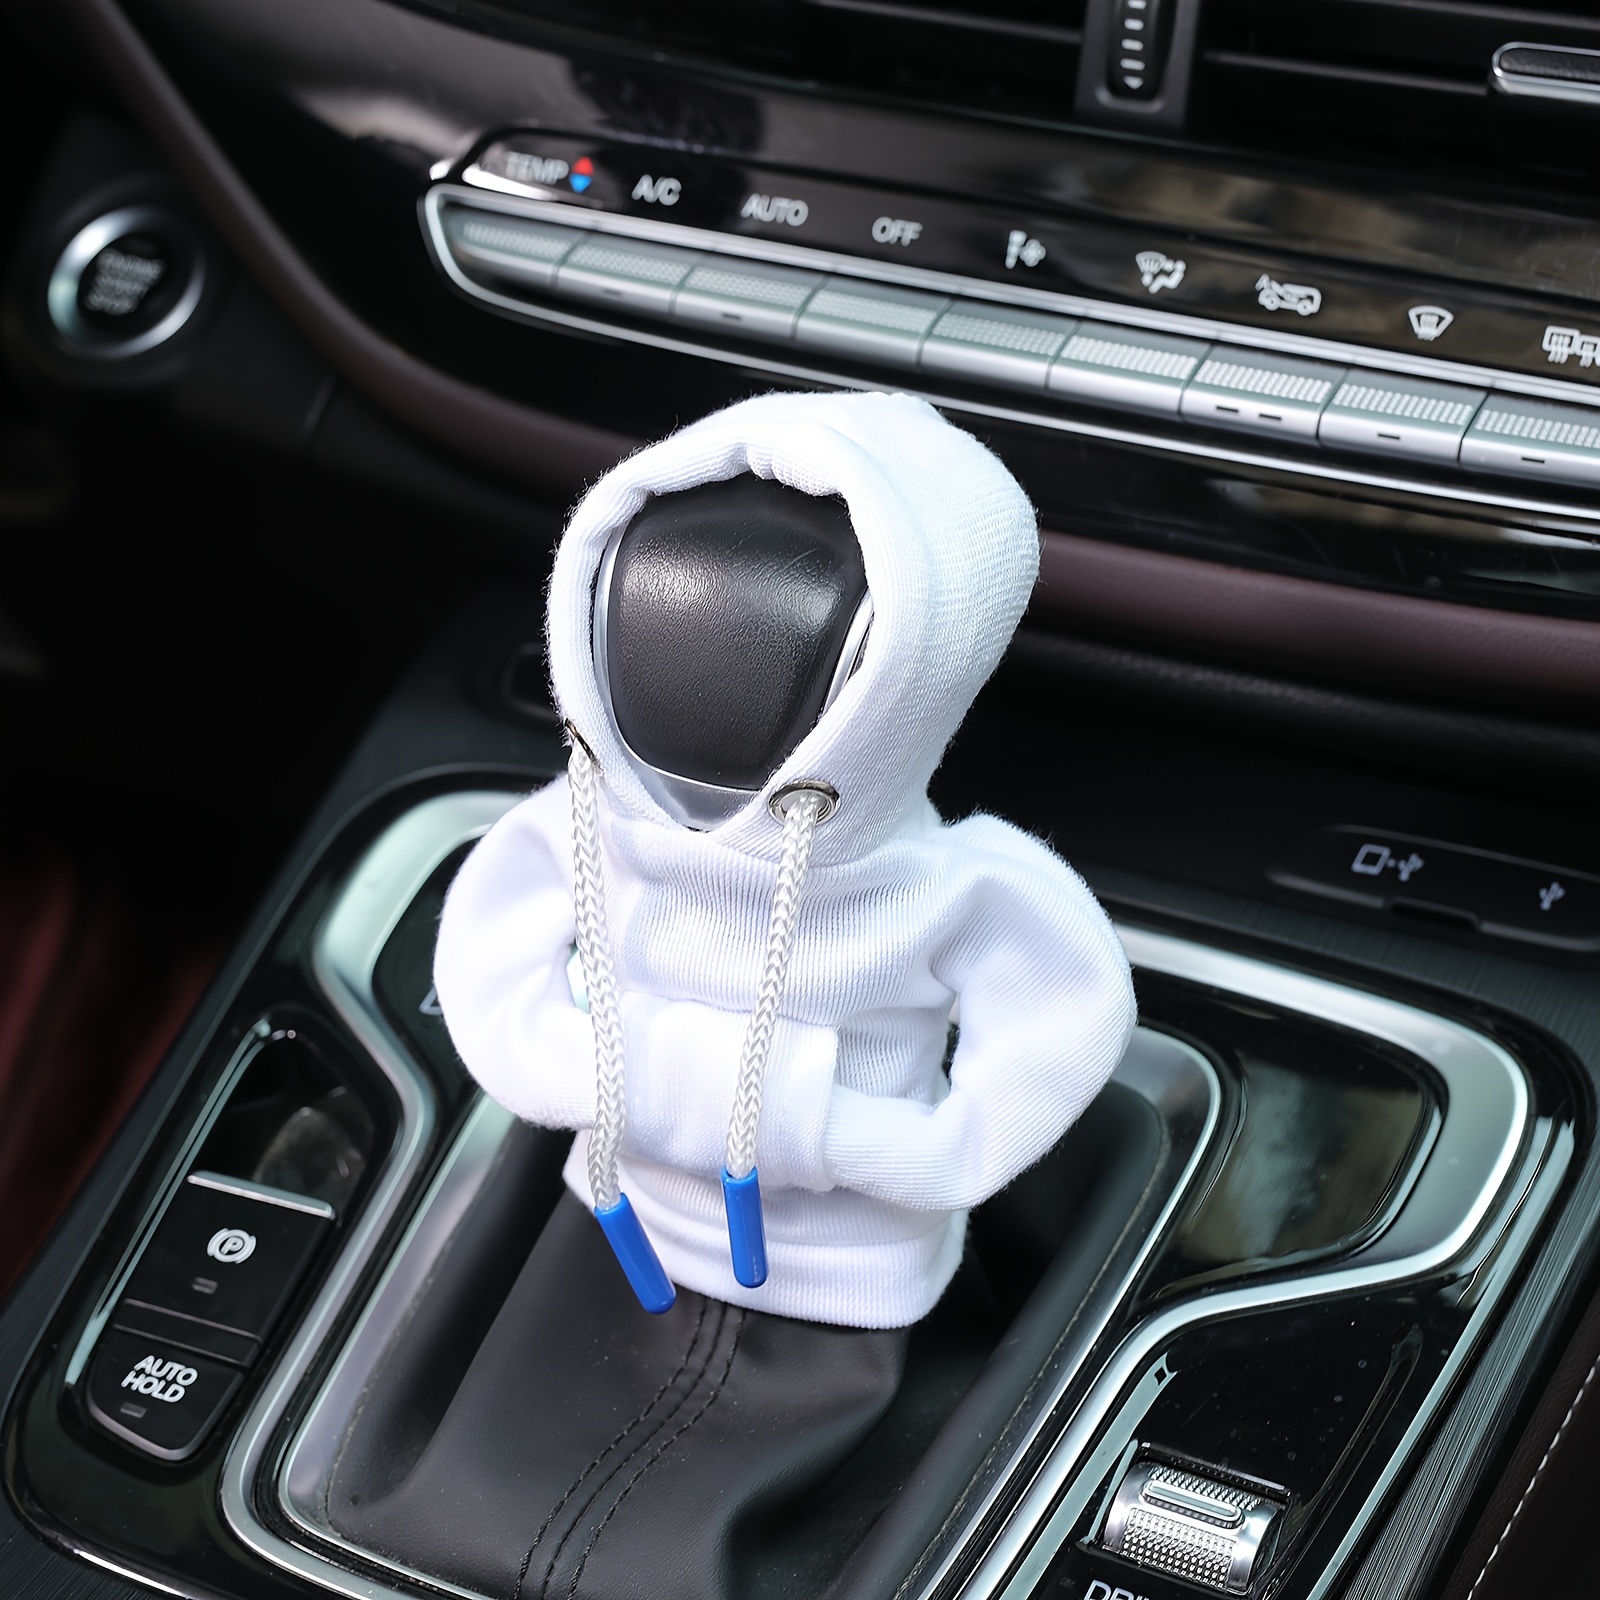 Large Size Universal Car Gear Shift Cover Hoodie Fashionable - Temu